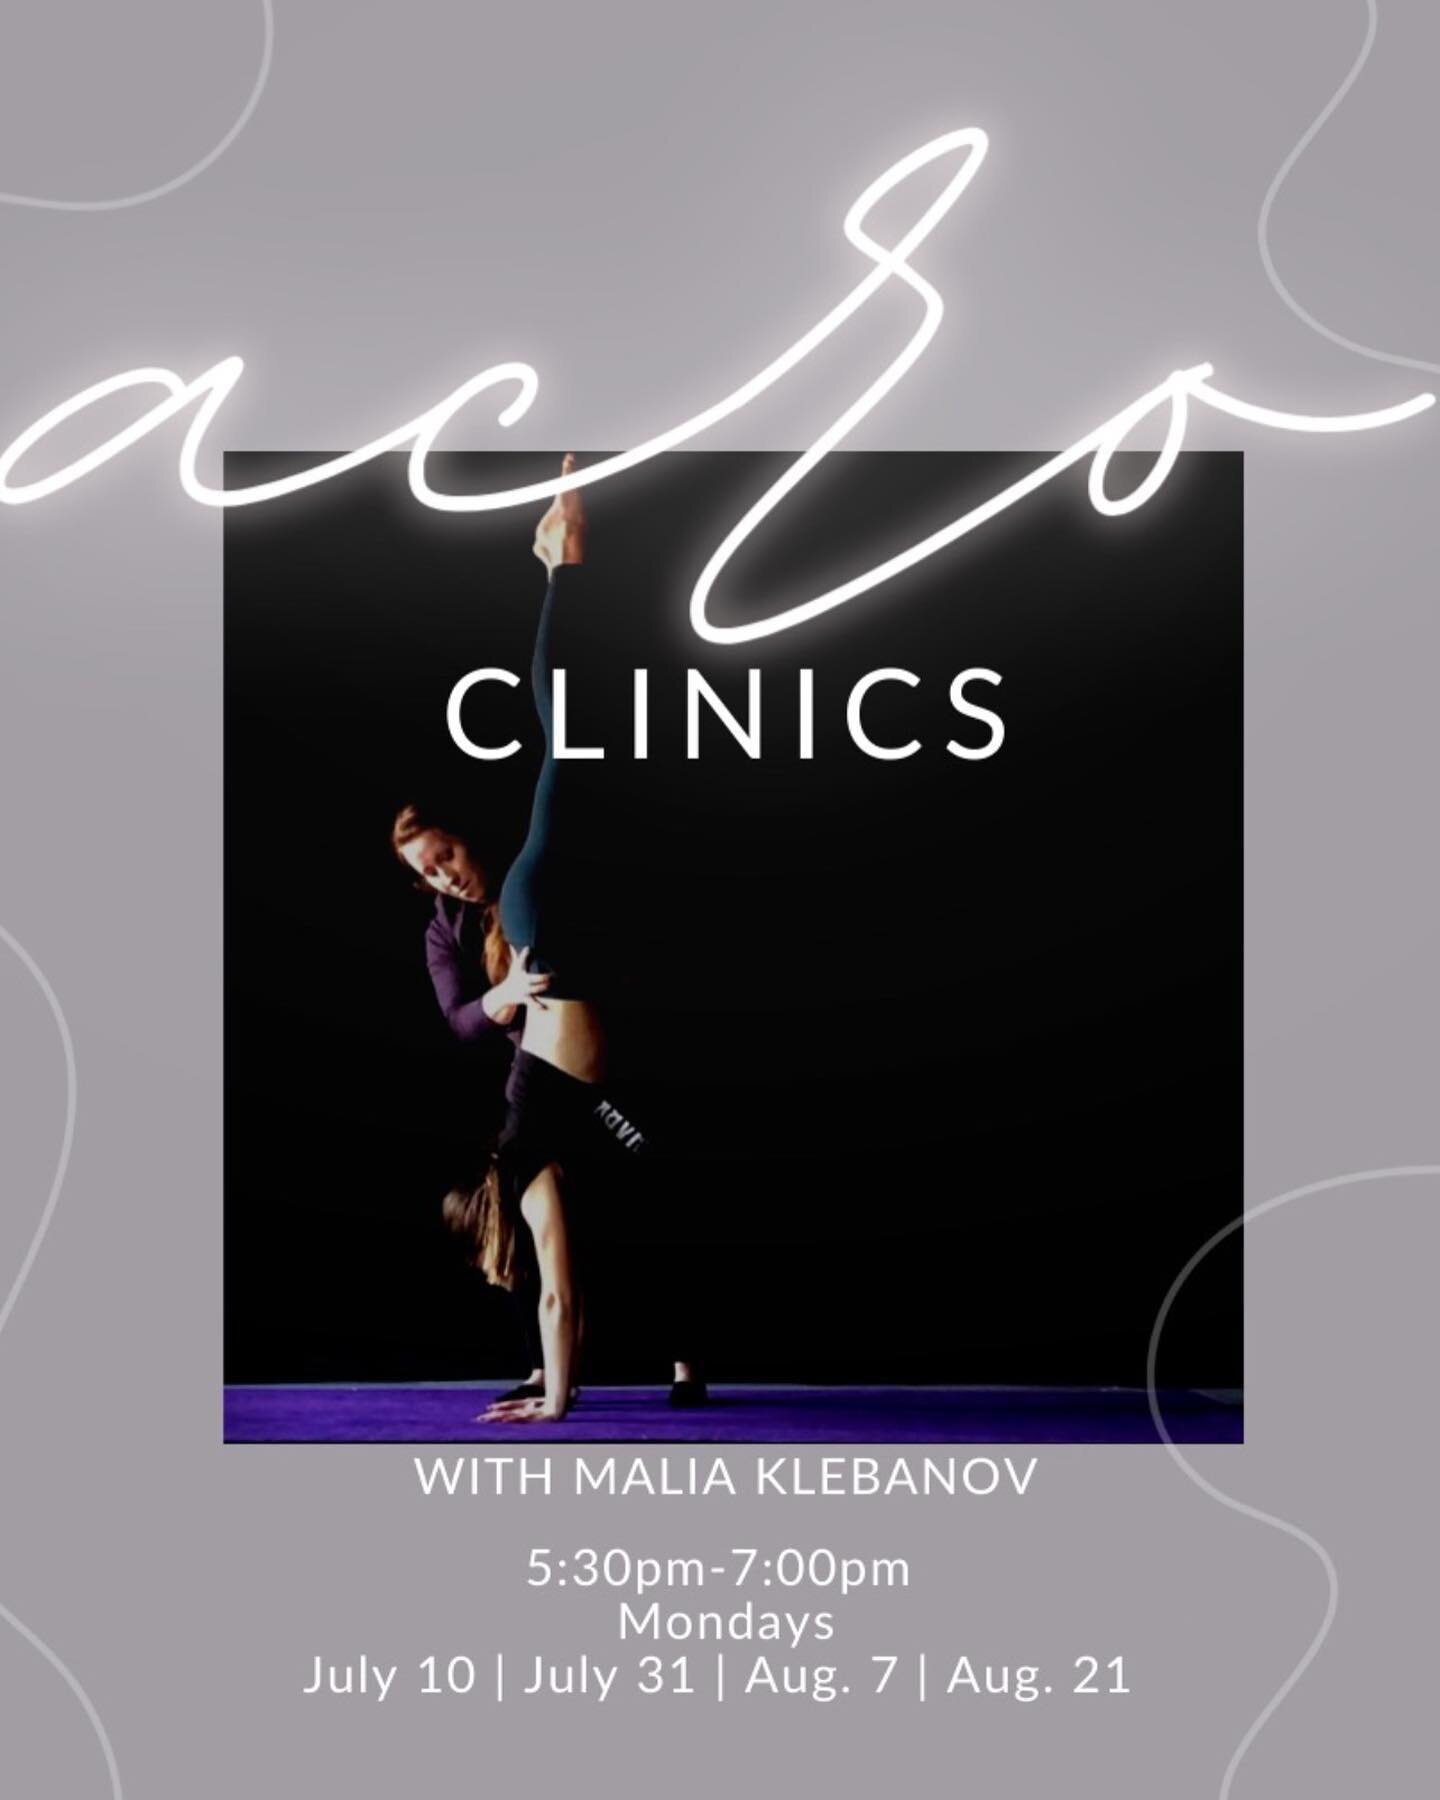 Acro Clinics with @maliaklebanov 
Age 9+ &nbsp; Int.-Adv level Only
July 10 | July 31 | Aug 7 | Aug 21
5:30-7:00pm
$25 per clinic OR all 4 for $80